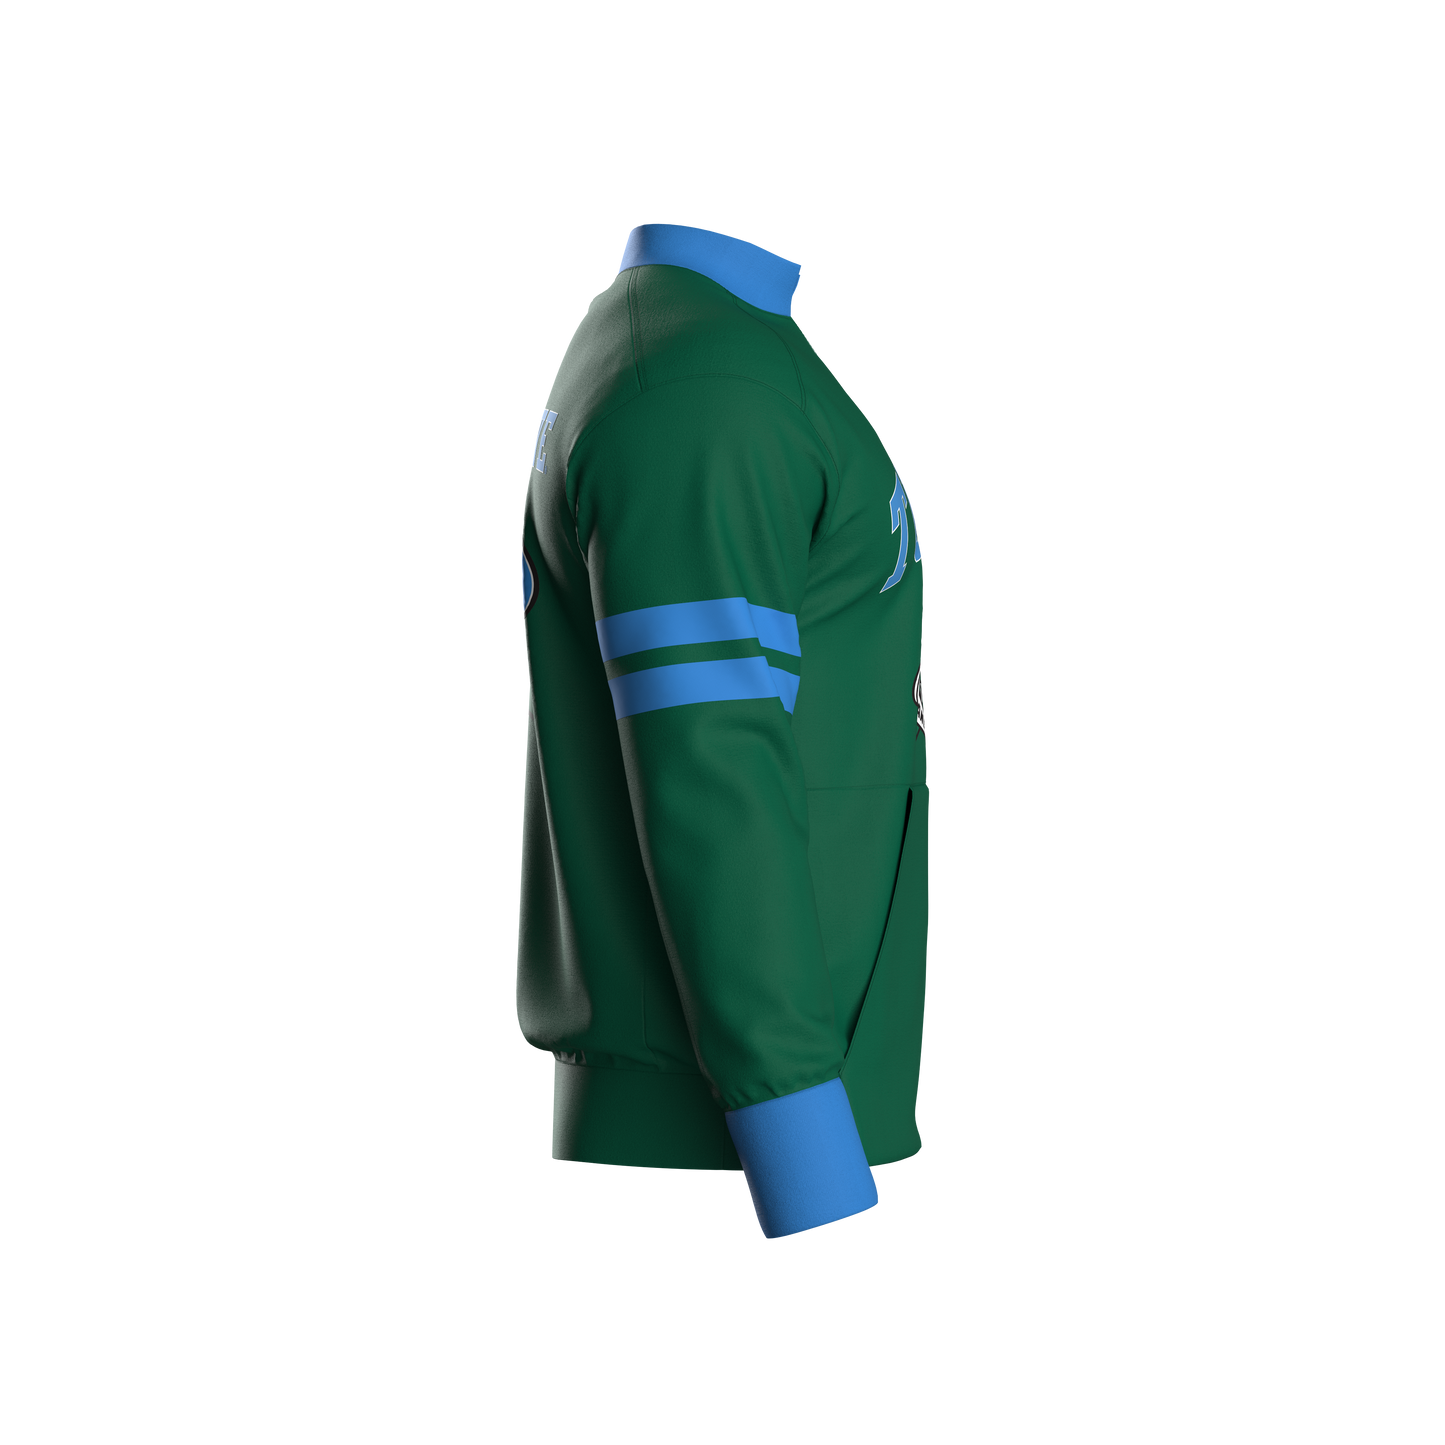 Tulane University Home Pullover (adult)